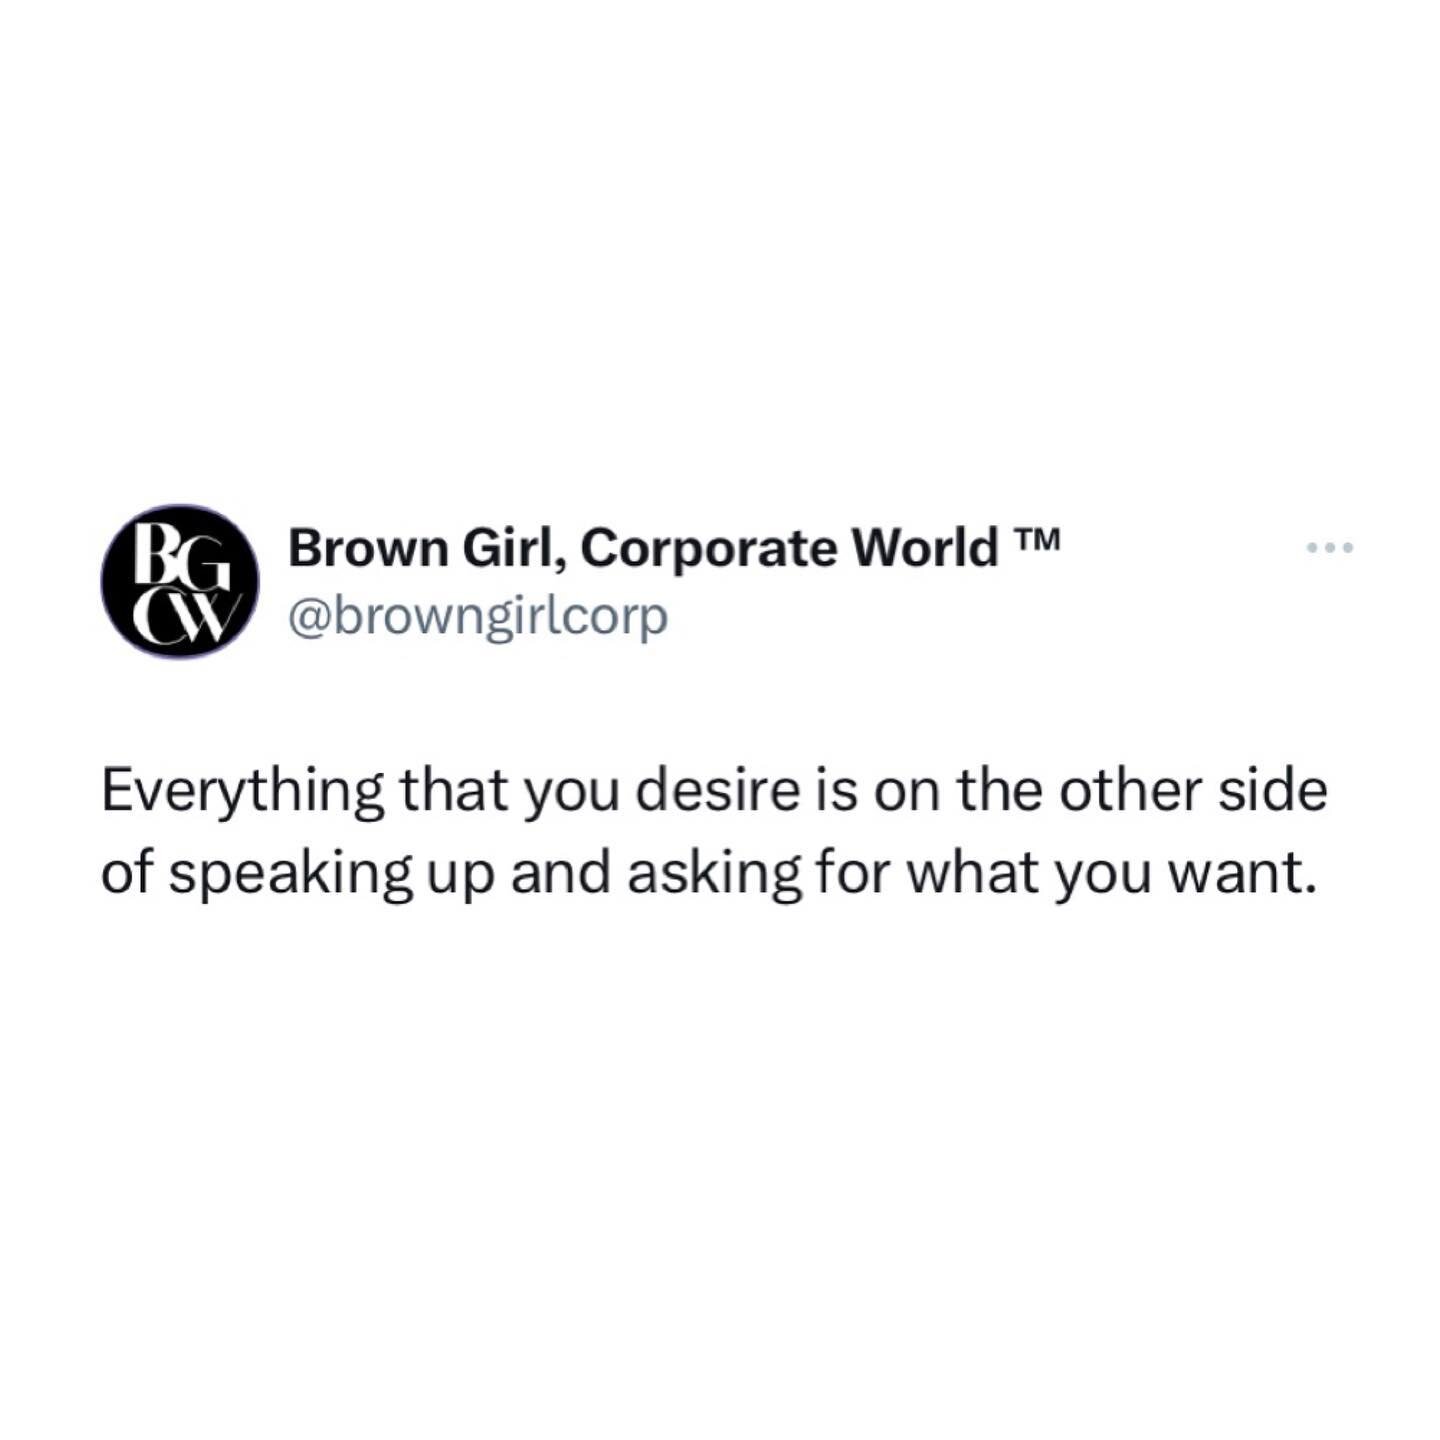 I used to be afraid of the sound of my own voice until I started using it and seeing results. Don&rsquo;t let anyone silence you, and that includes yourself. 🖤 #browngirl #corporateworld